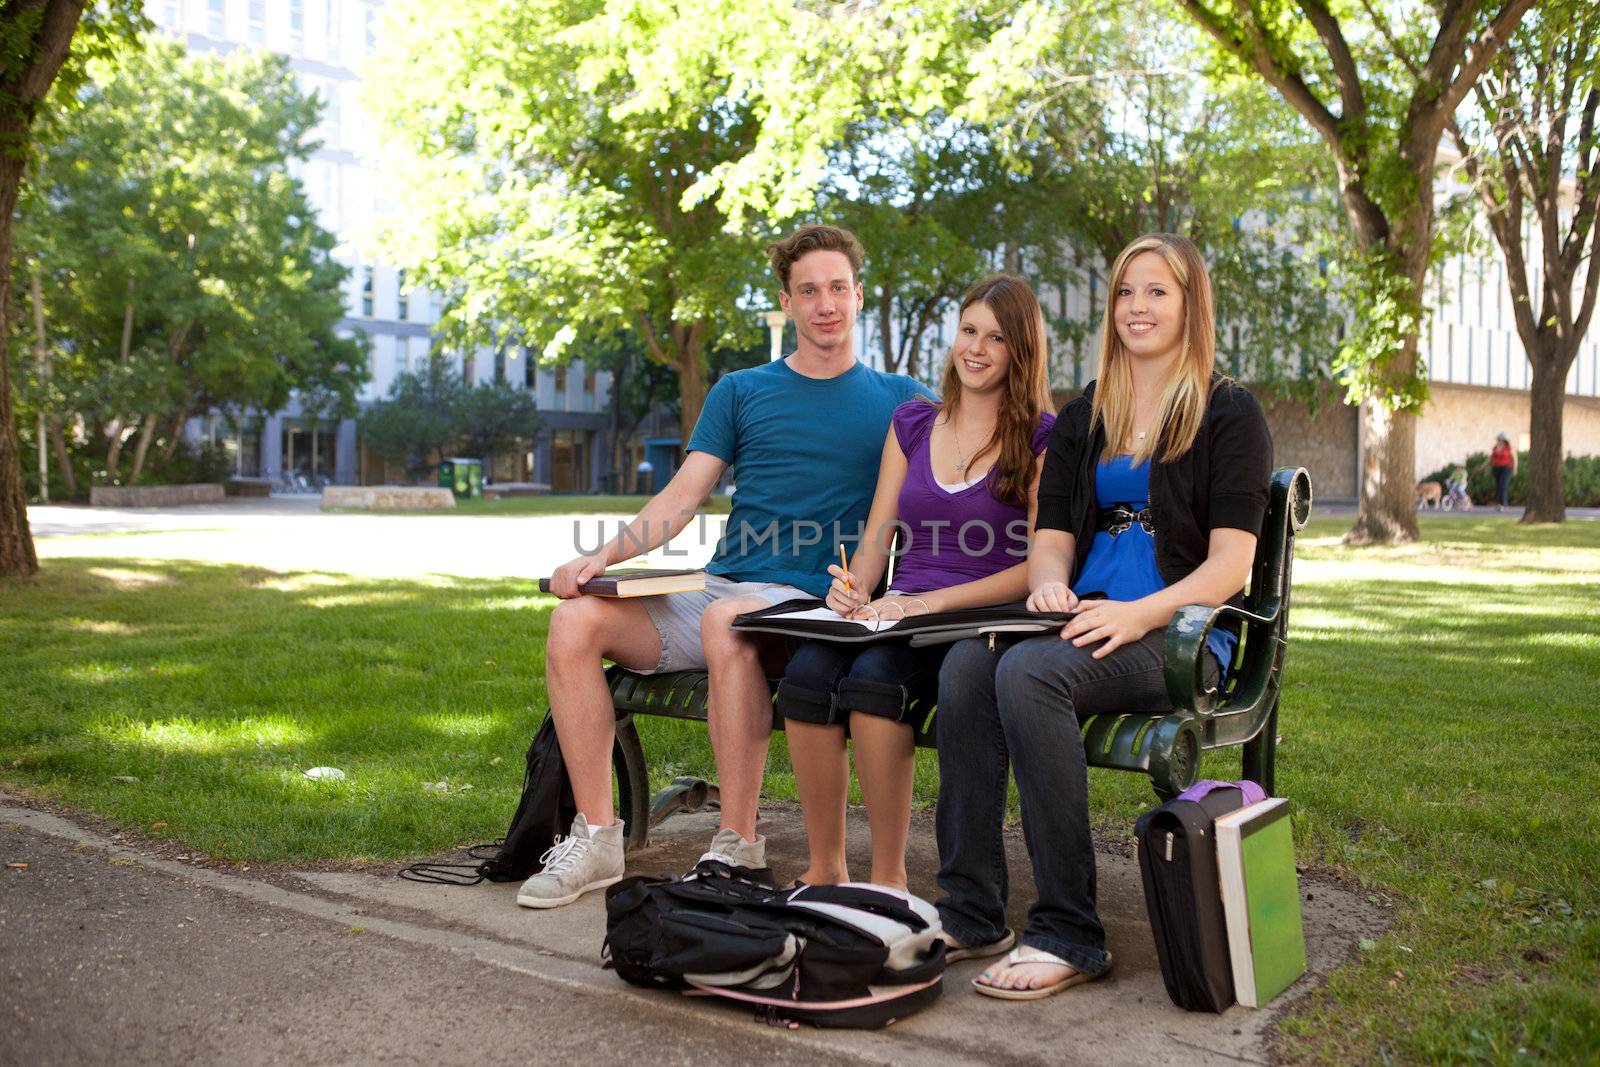 Student Study Group by leaf